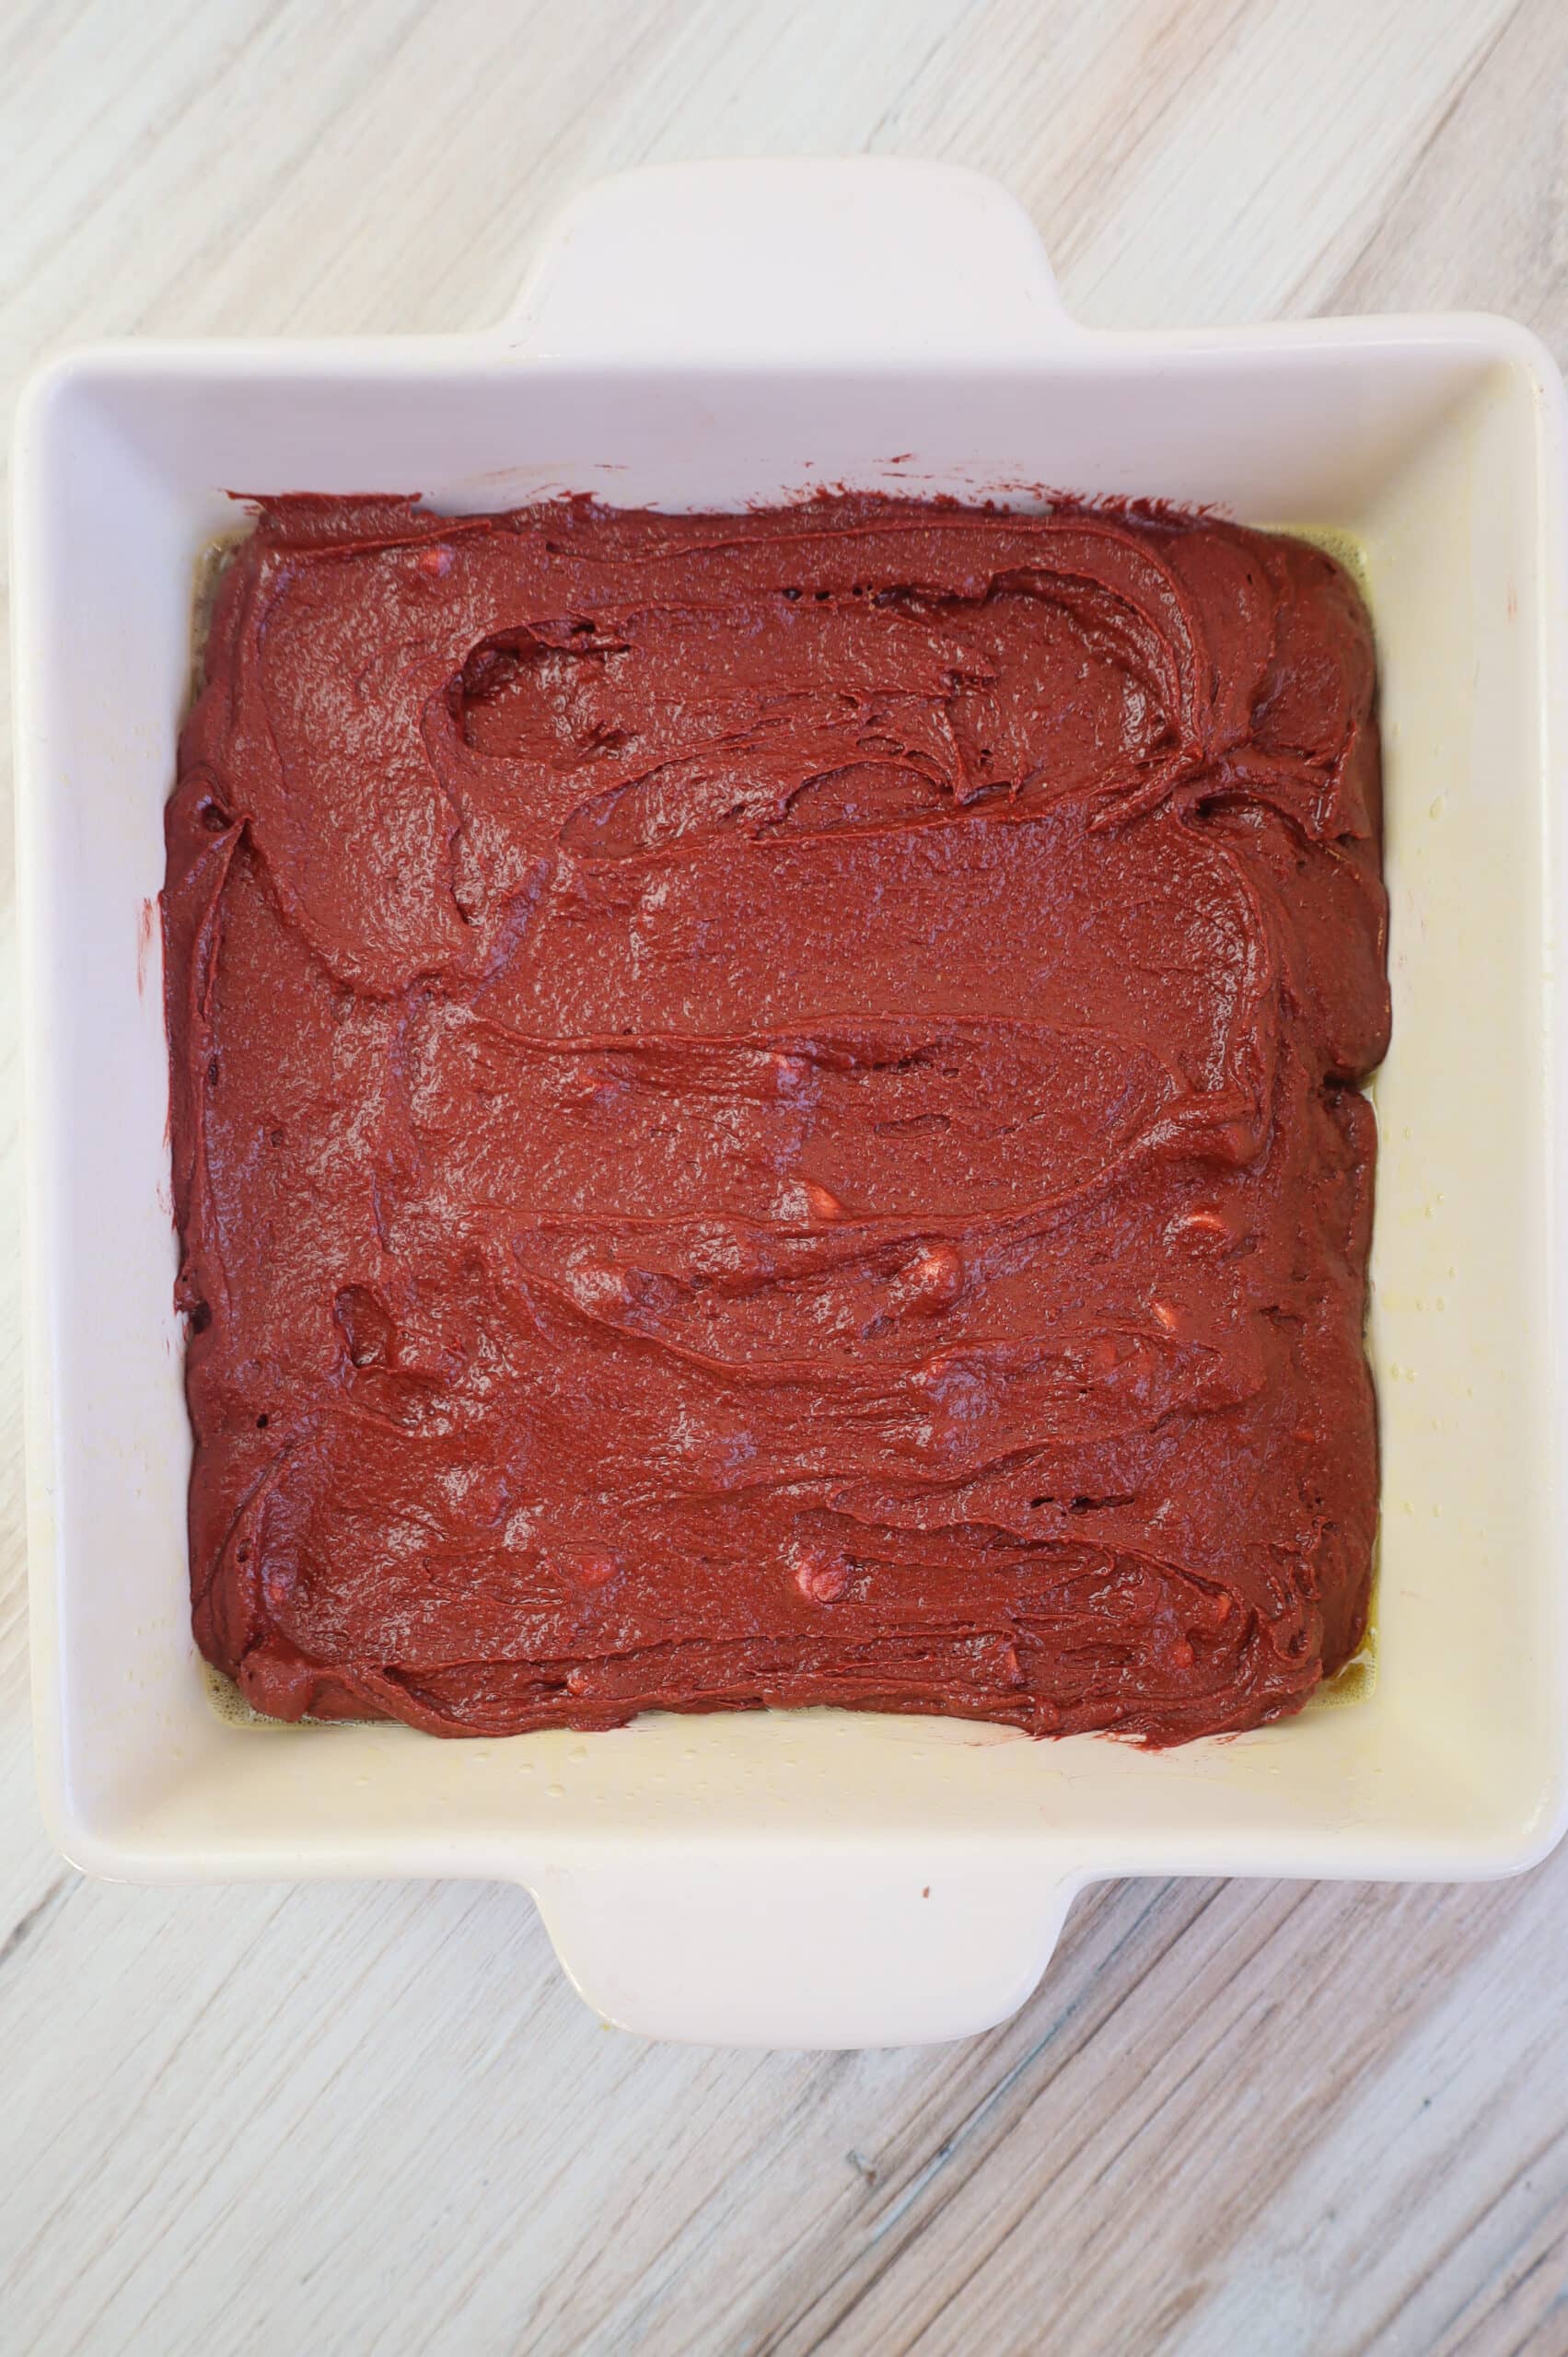 Unbaked brownie batter in a white baking dish.